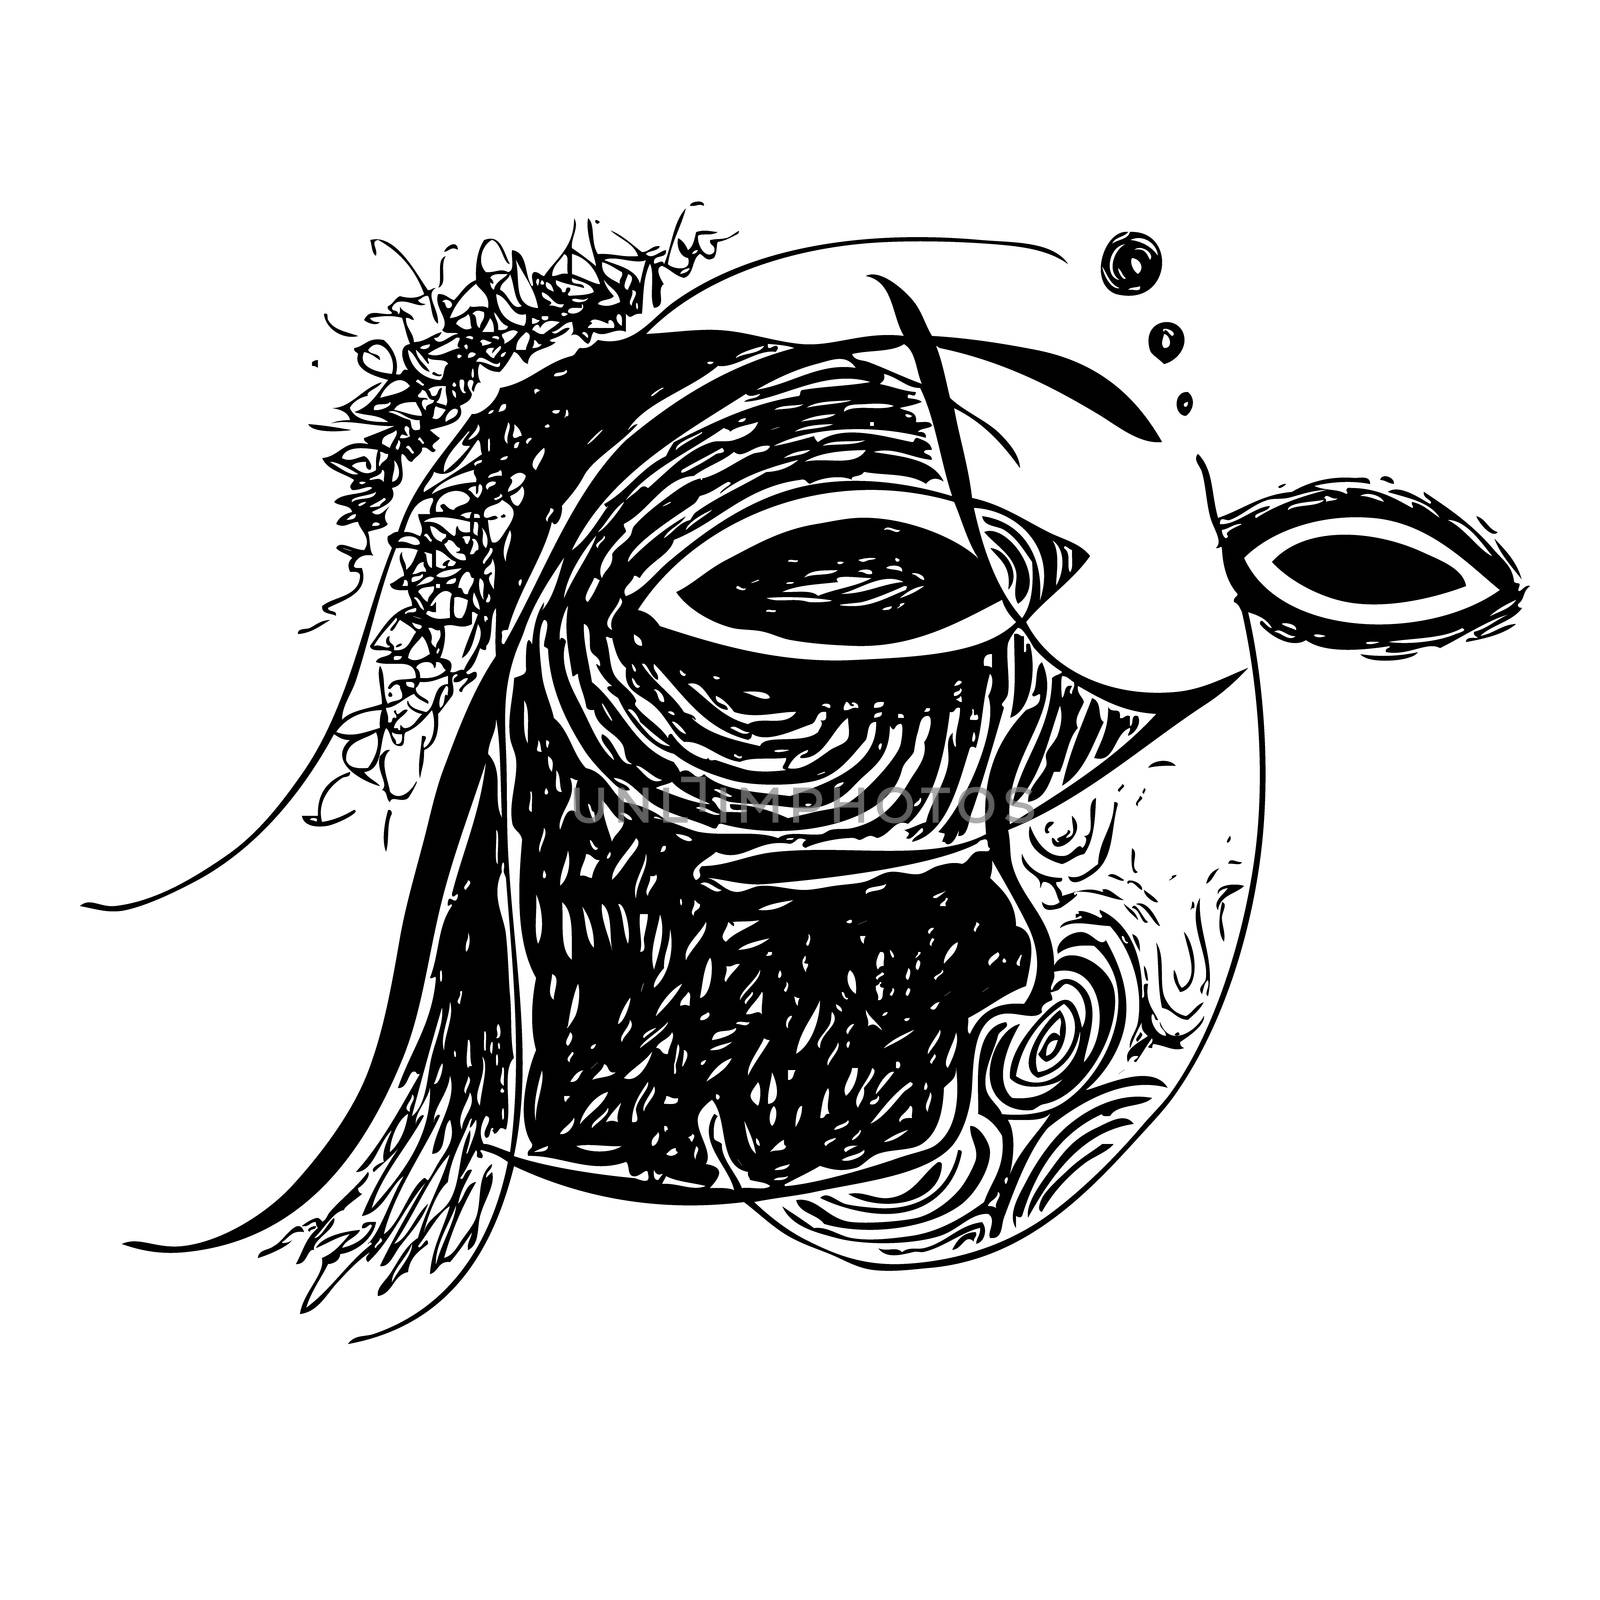 Freehand illustration of abstract design face on white background, doodle hand drawn